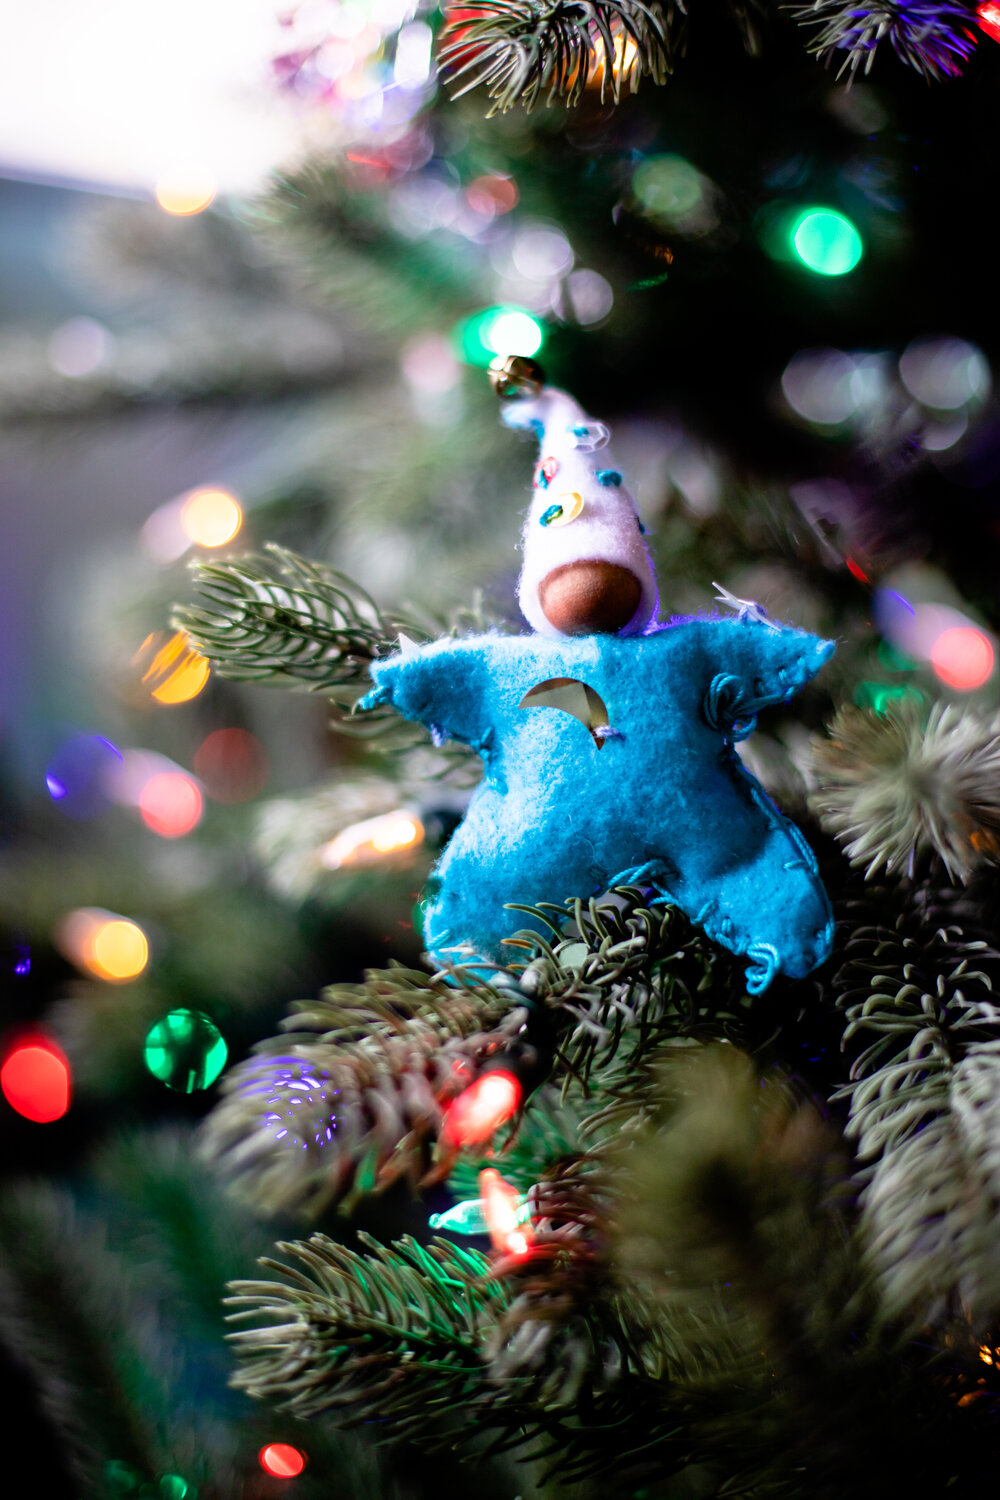 Handmade Holidays Star Babies with Forest Fairy Crafts for Seasonal Gifts and Decor